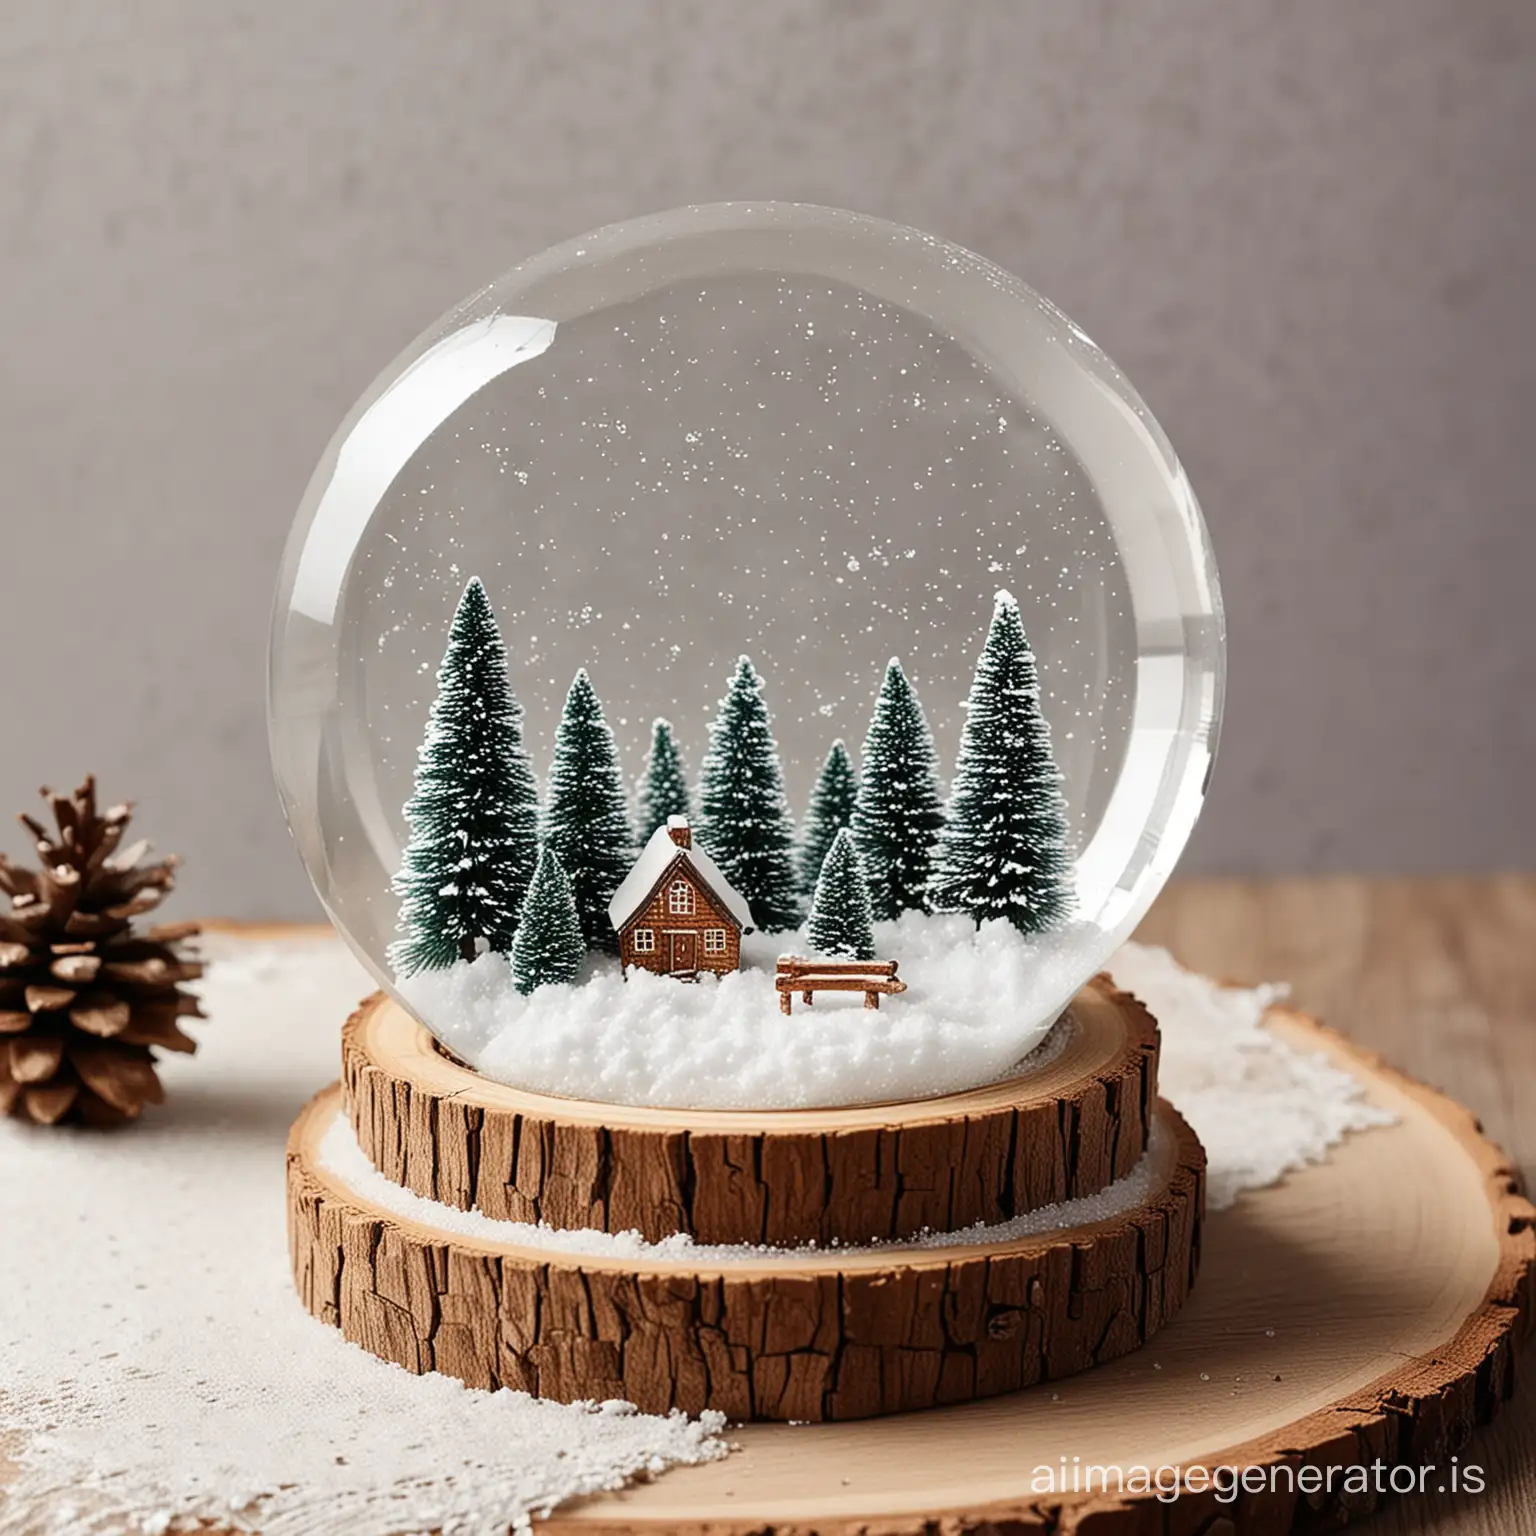 Wooden Slice Snow Globe centerpiece combines the quaint charm of a miniature winter scene with the rustic appeal of natural wood, creating a cozy and elegant display for your winter wedding